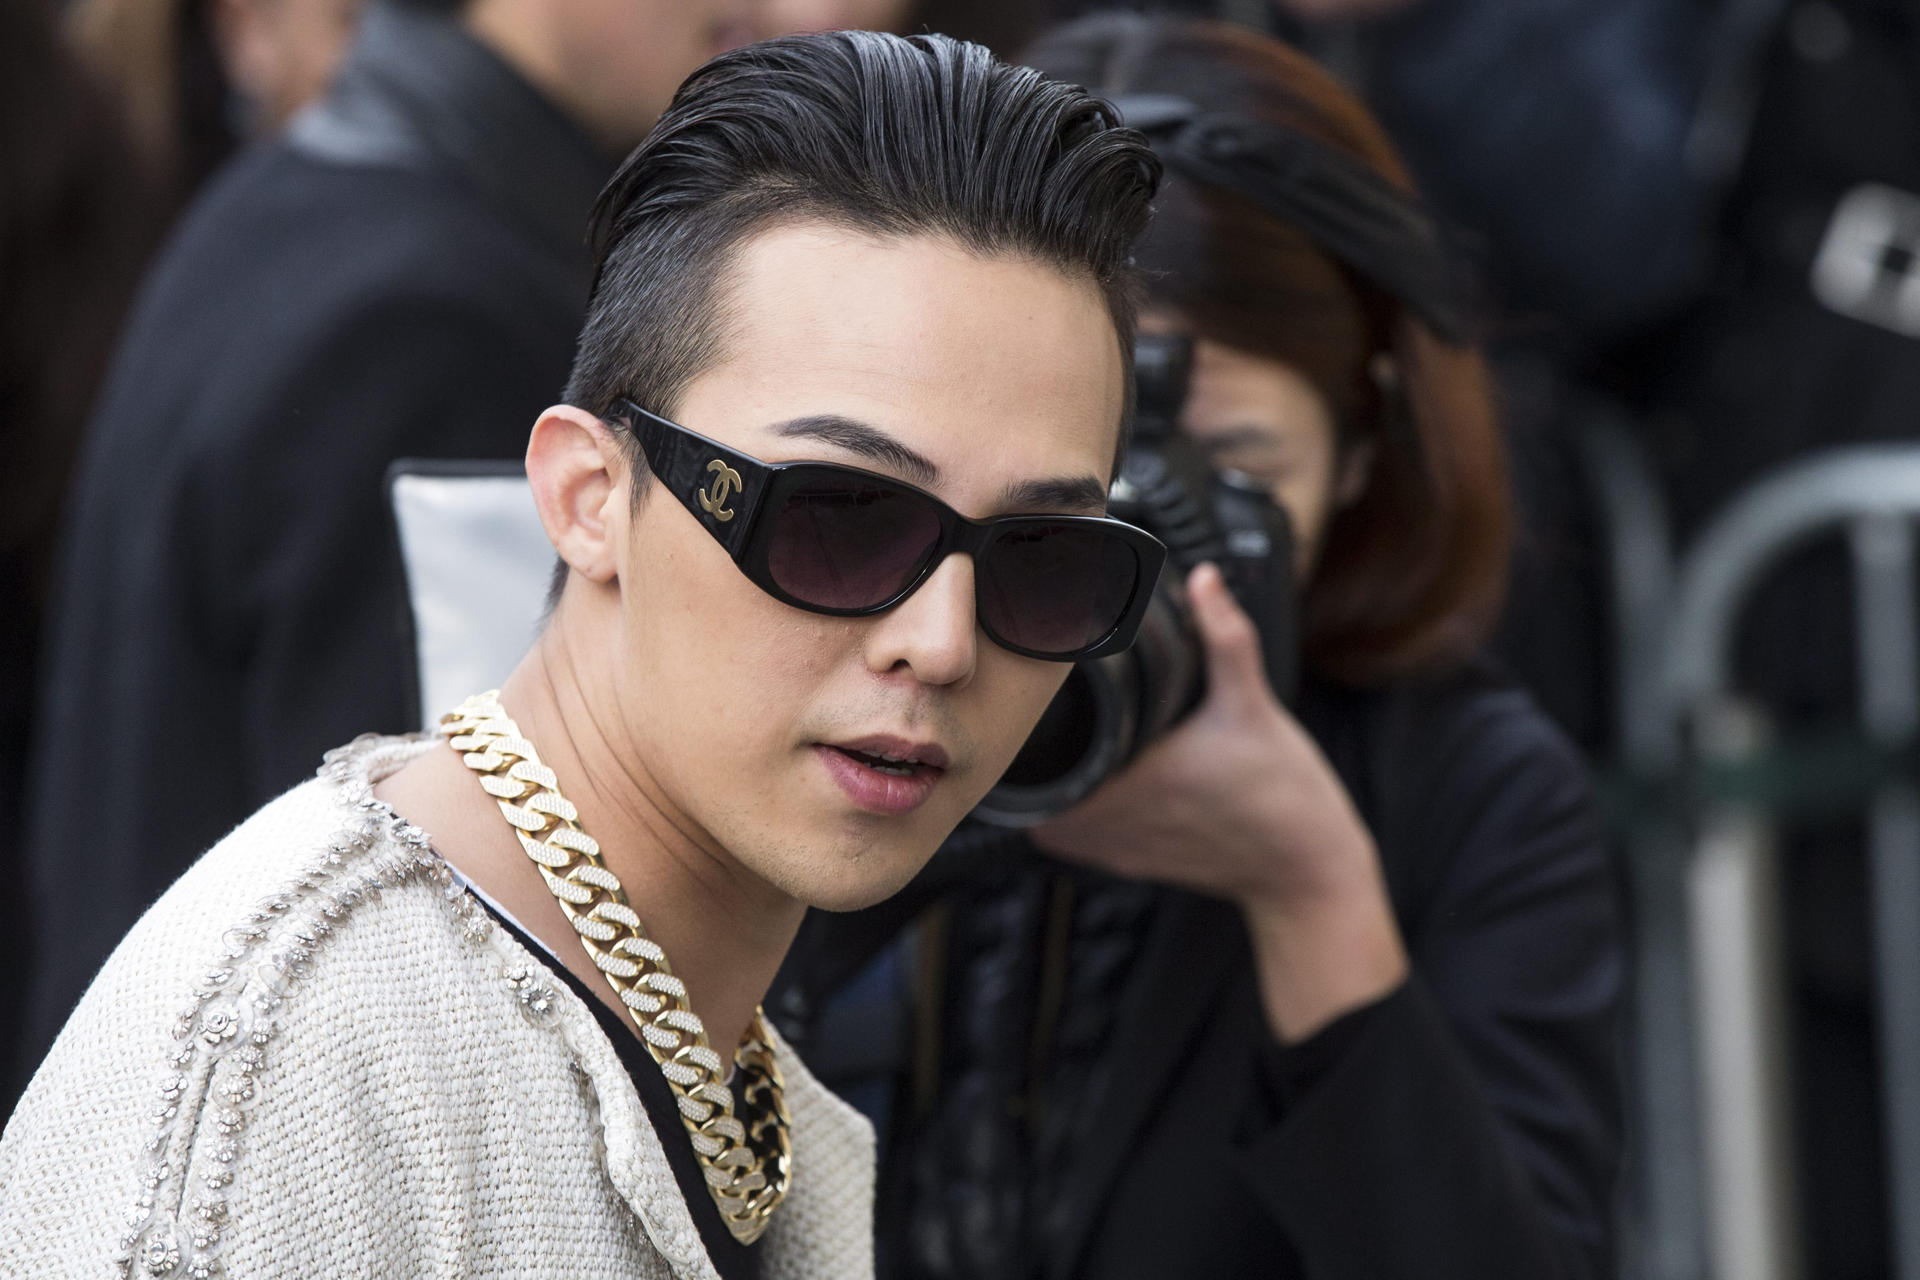 South Korean singer Kwon Ji Yong, aka G-Dragon, arrives for the presentation of the Spring/Summer 2015 Haute Couture collection by German designer Karl Lagerfeld for Chanel during the Paris Fashion Week, in Paris, France, 27 January 2015. EFE-EPA FILE/ETIENNE LAURENT